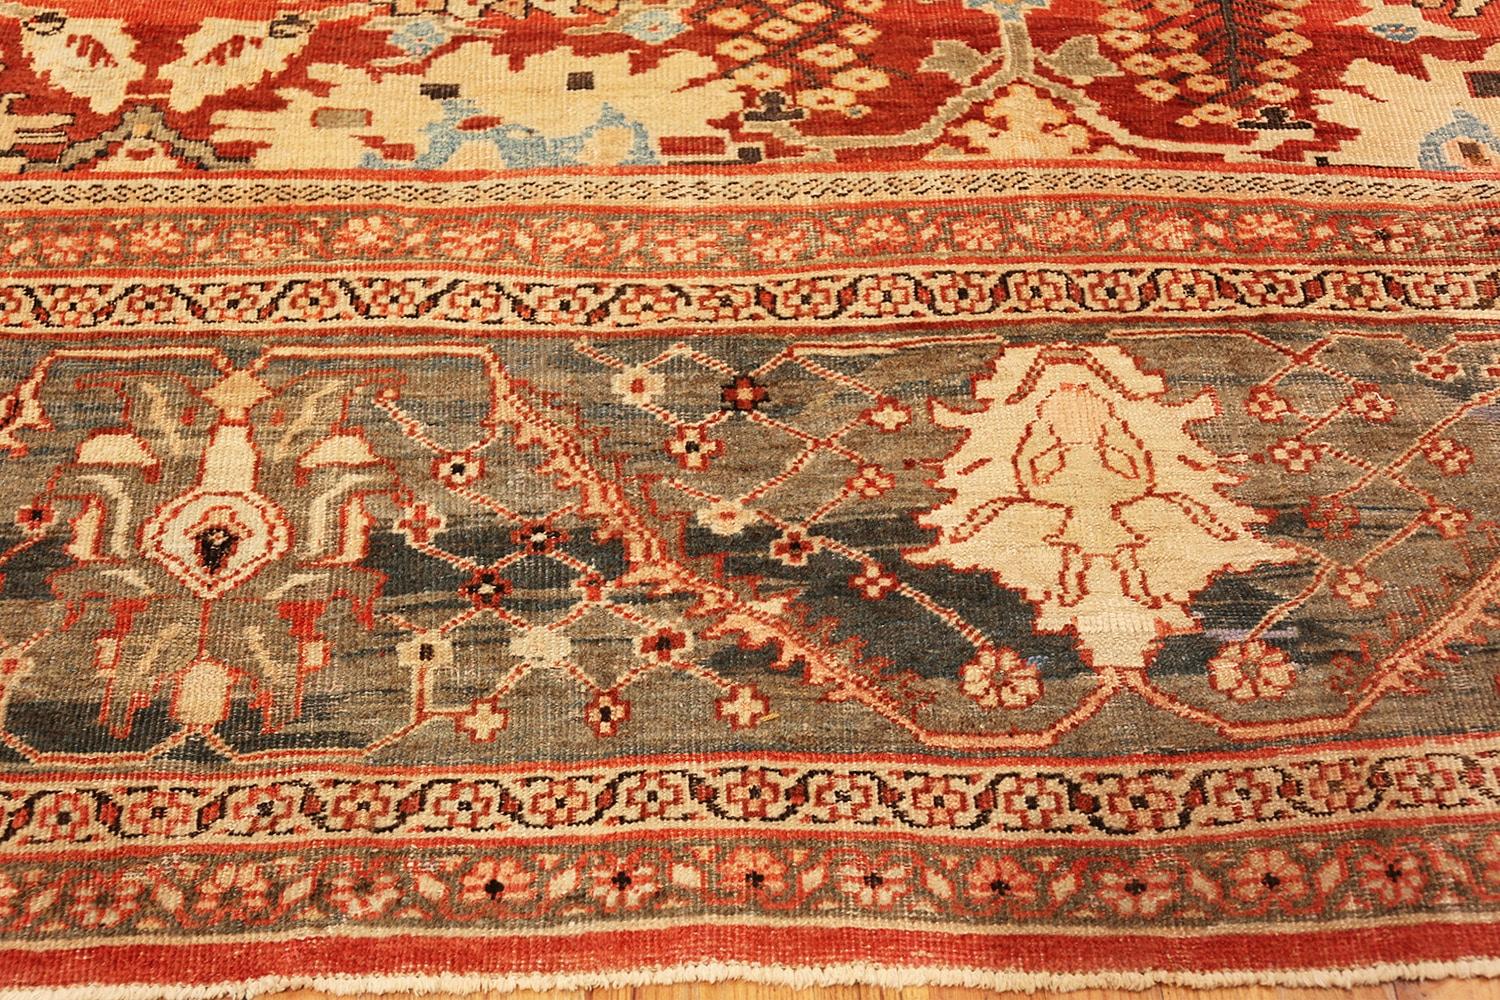 An Impressive Large Size Rustic Antique Persian Sultanabad Carpet, Country of Origin / rug type: Persian rugs, Circa date: 1880's. Size: 14 ft 4 in x 19 ft 4 in (4.37 m x 5.89 m)

 